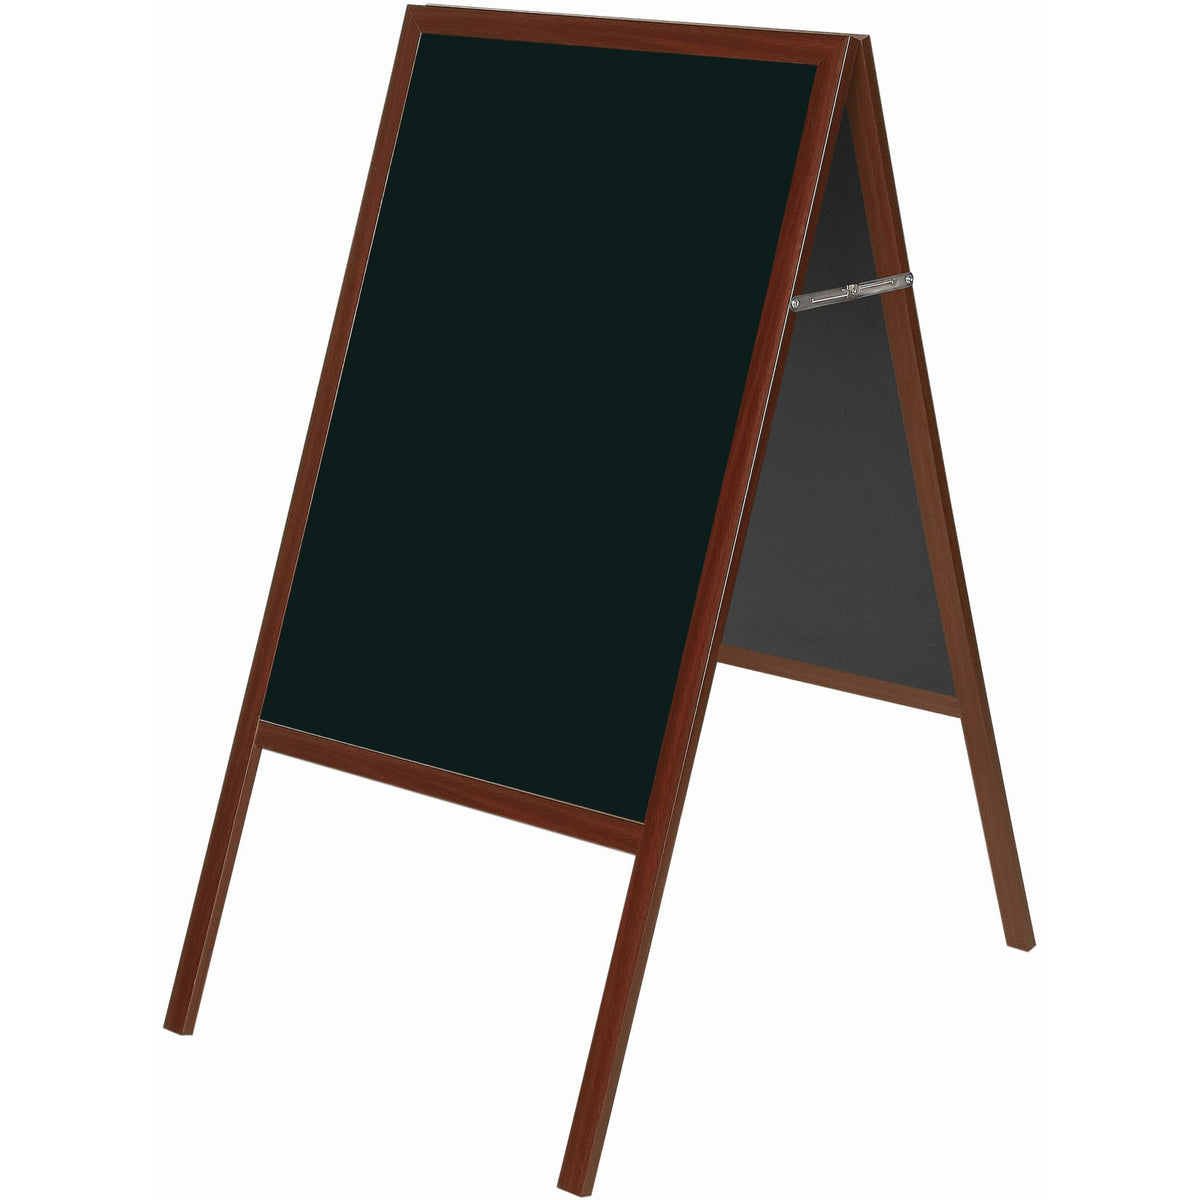 DKT30505052 Freestanding Magnetic Wet Erase Sidewalk Sign Board, Double Sided A-Frame Sandwich Board, 35" x 24", Cherry Wood Frame by MasterVision